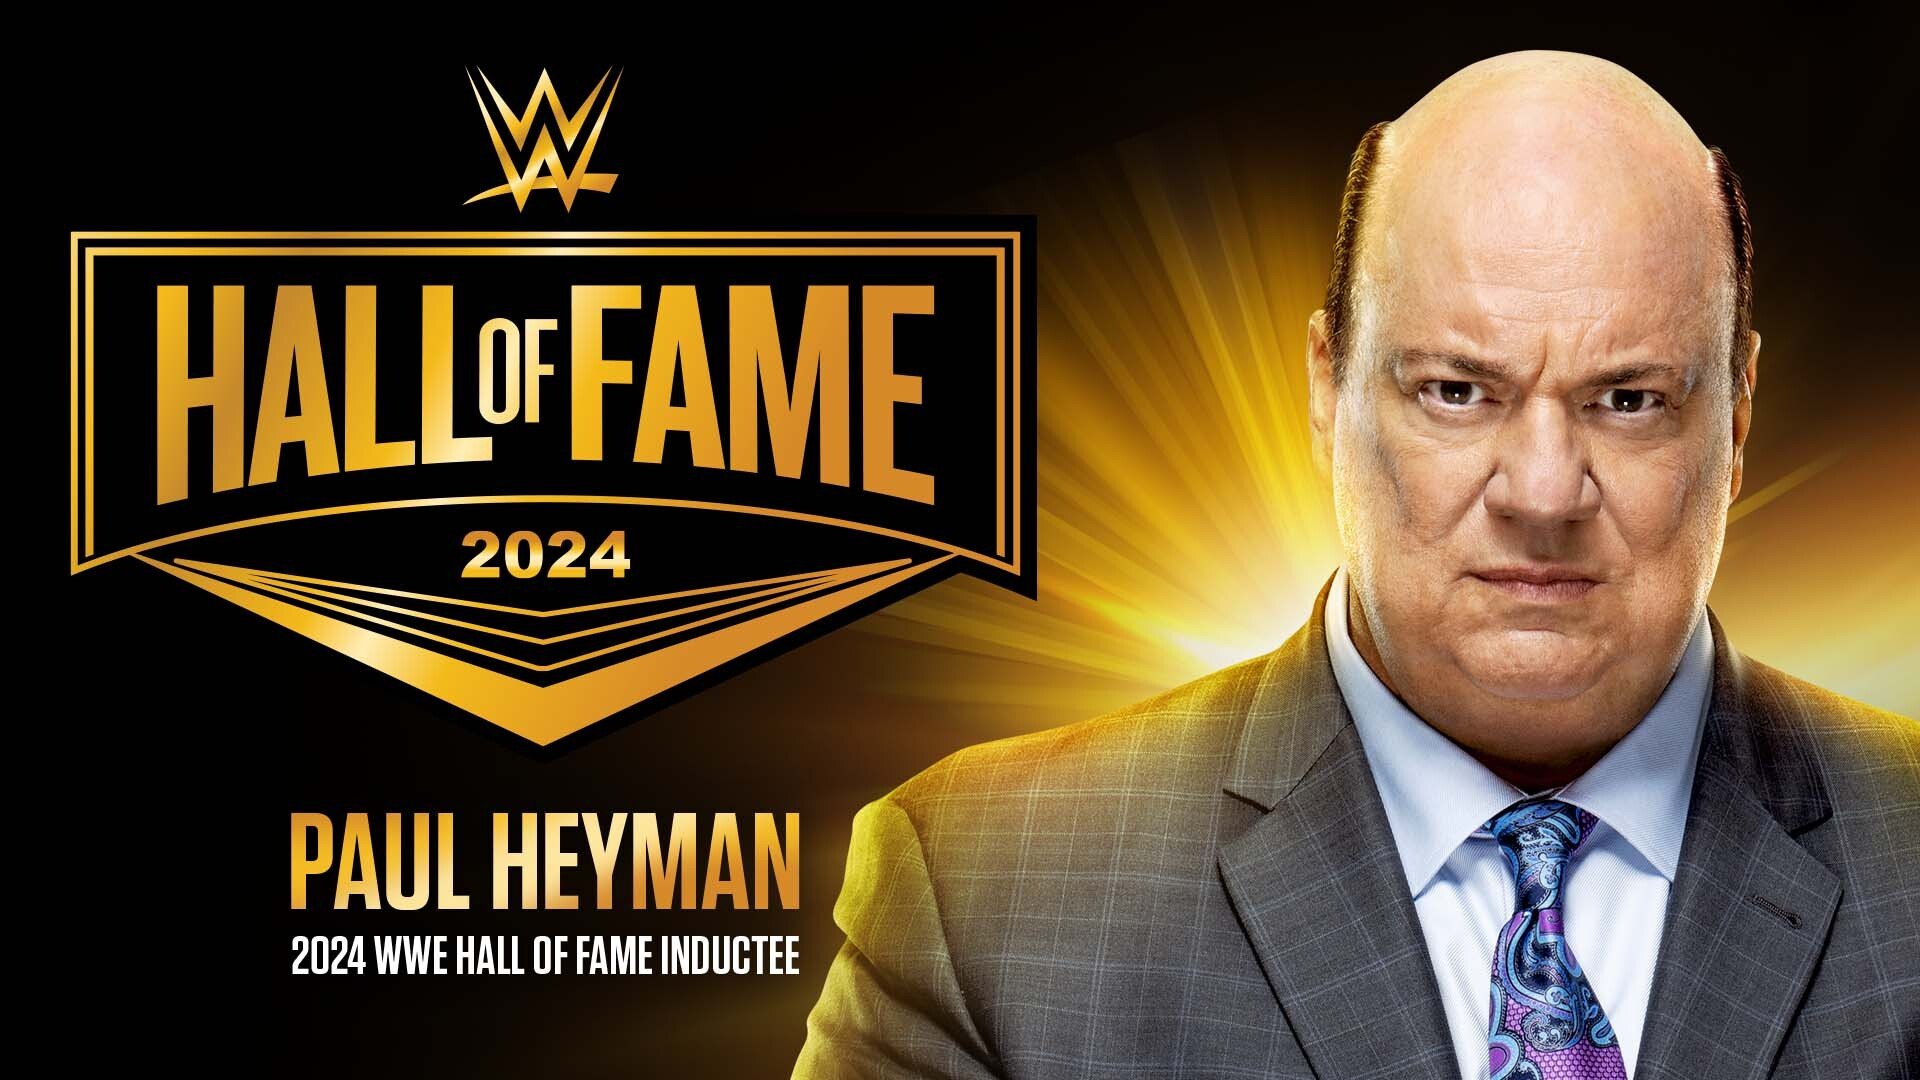 Paul Heyman Declined Induction into WWE Hall of Fame in the Past